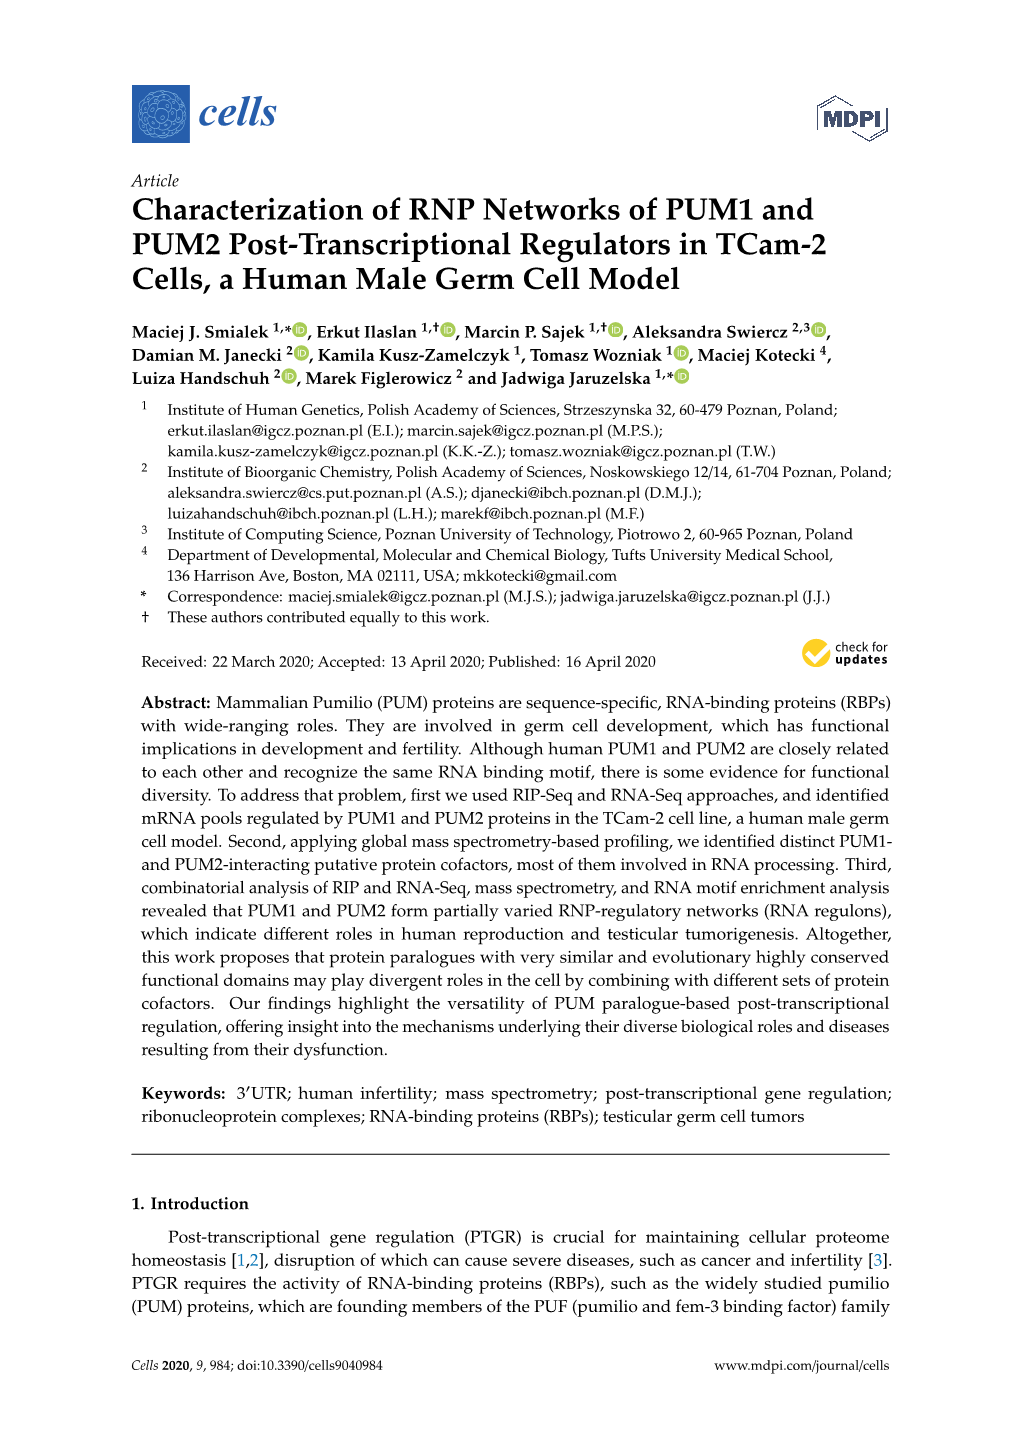 Characterization of RNP Networks of PUM1 and PUM2 Post-Transcriptional Regulators in Tcam-2 Cells, a Human Male Germ Cell Model